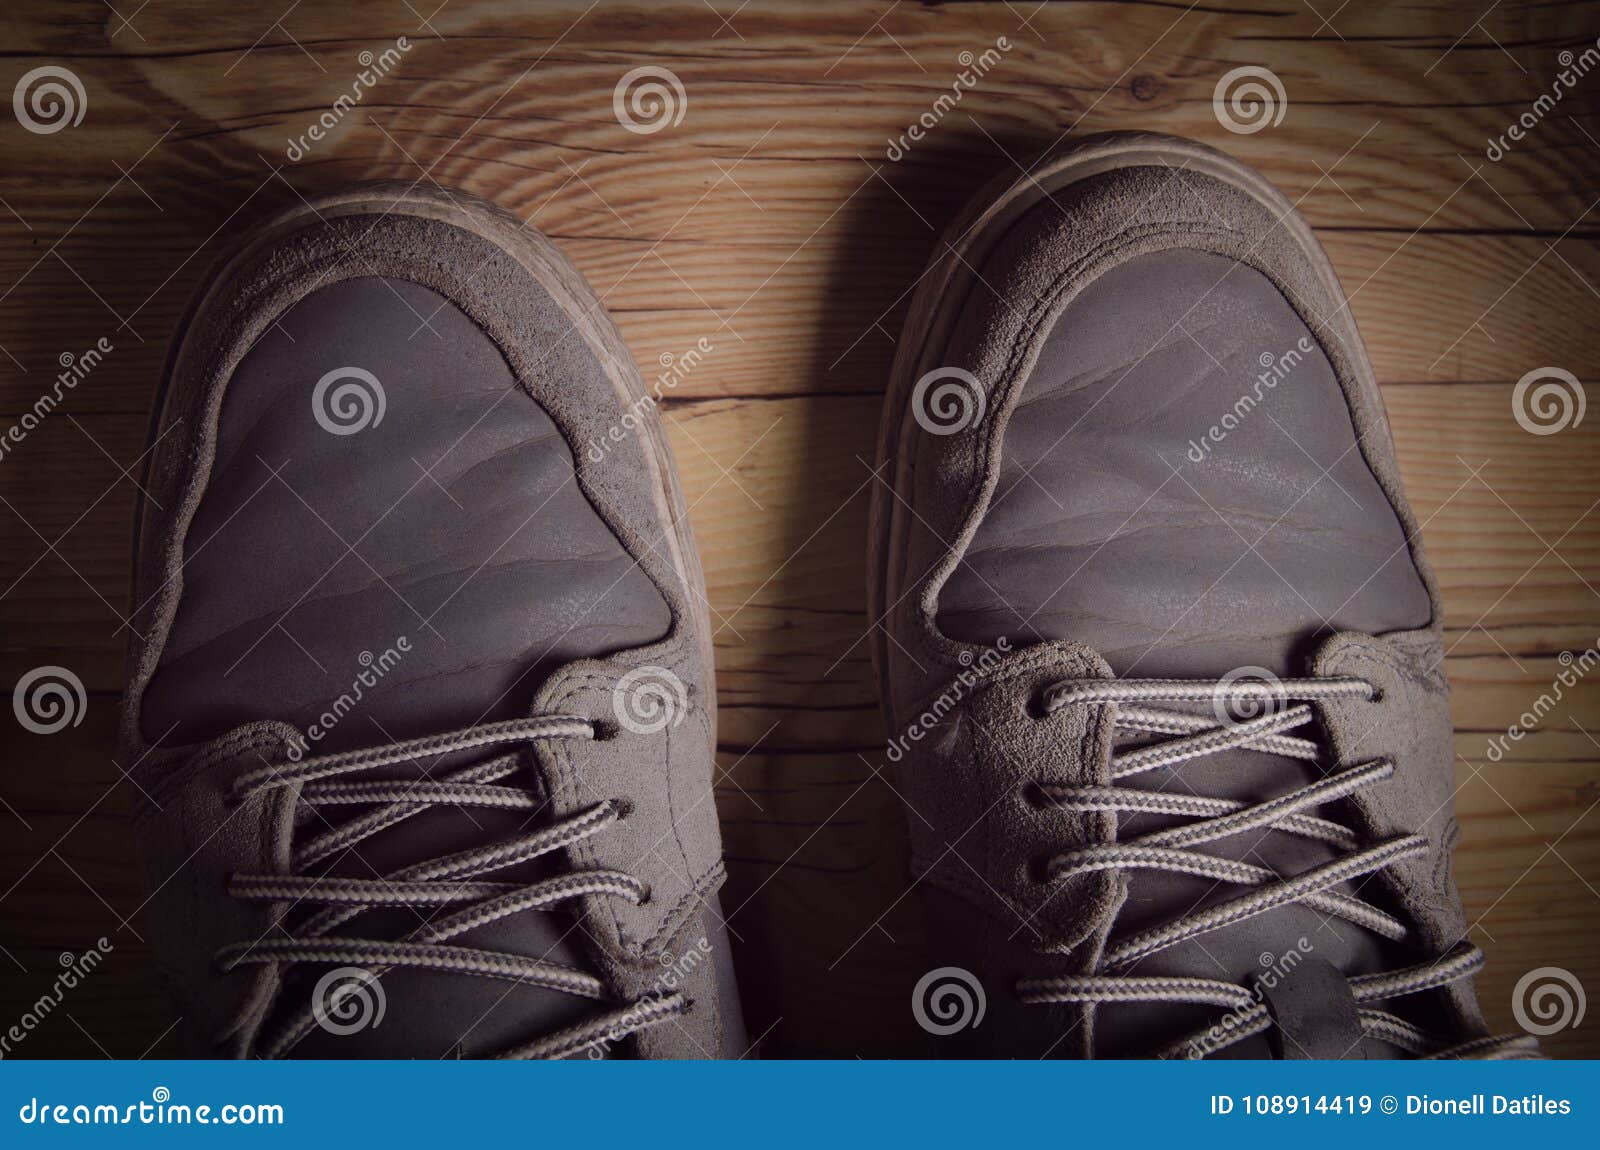 Top View of a Man Wearing a Pair of Sneakers Stock Image - Image of ...